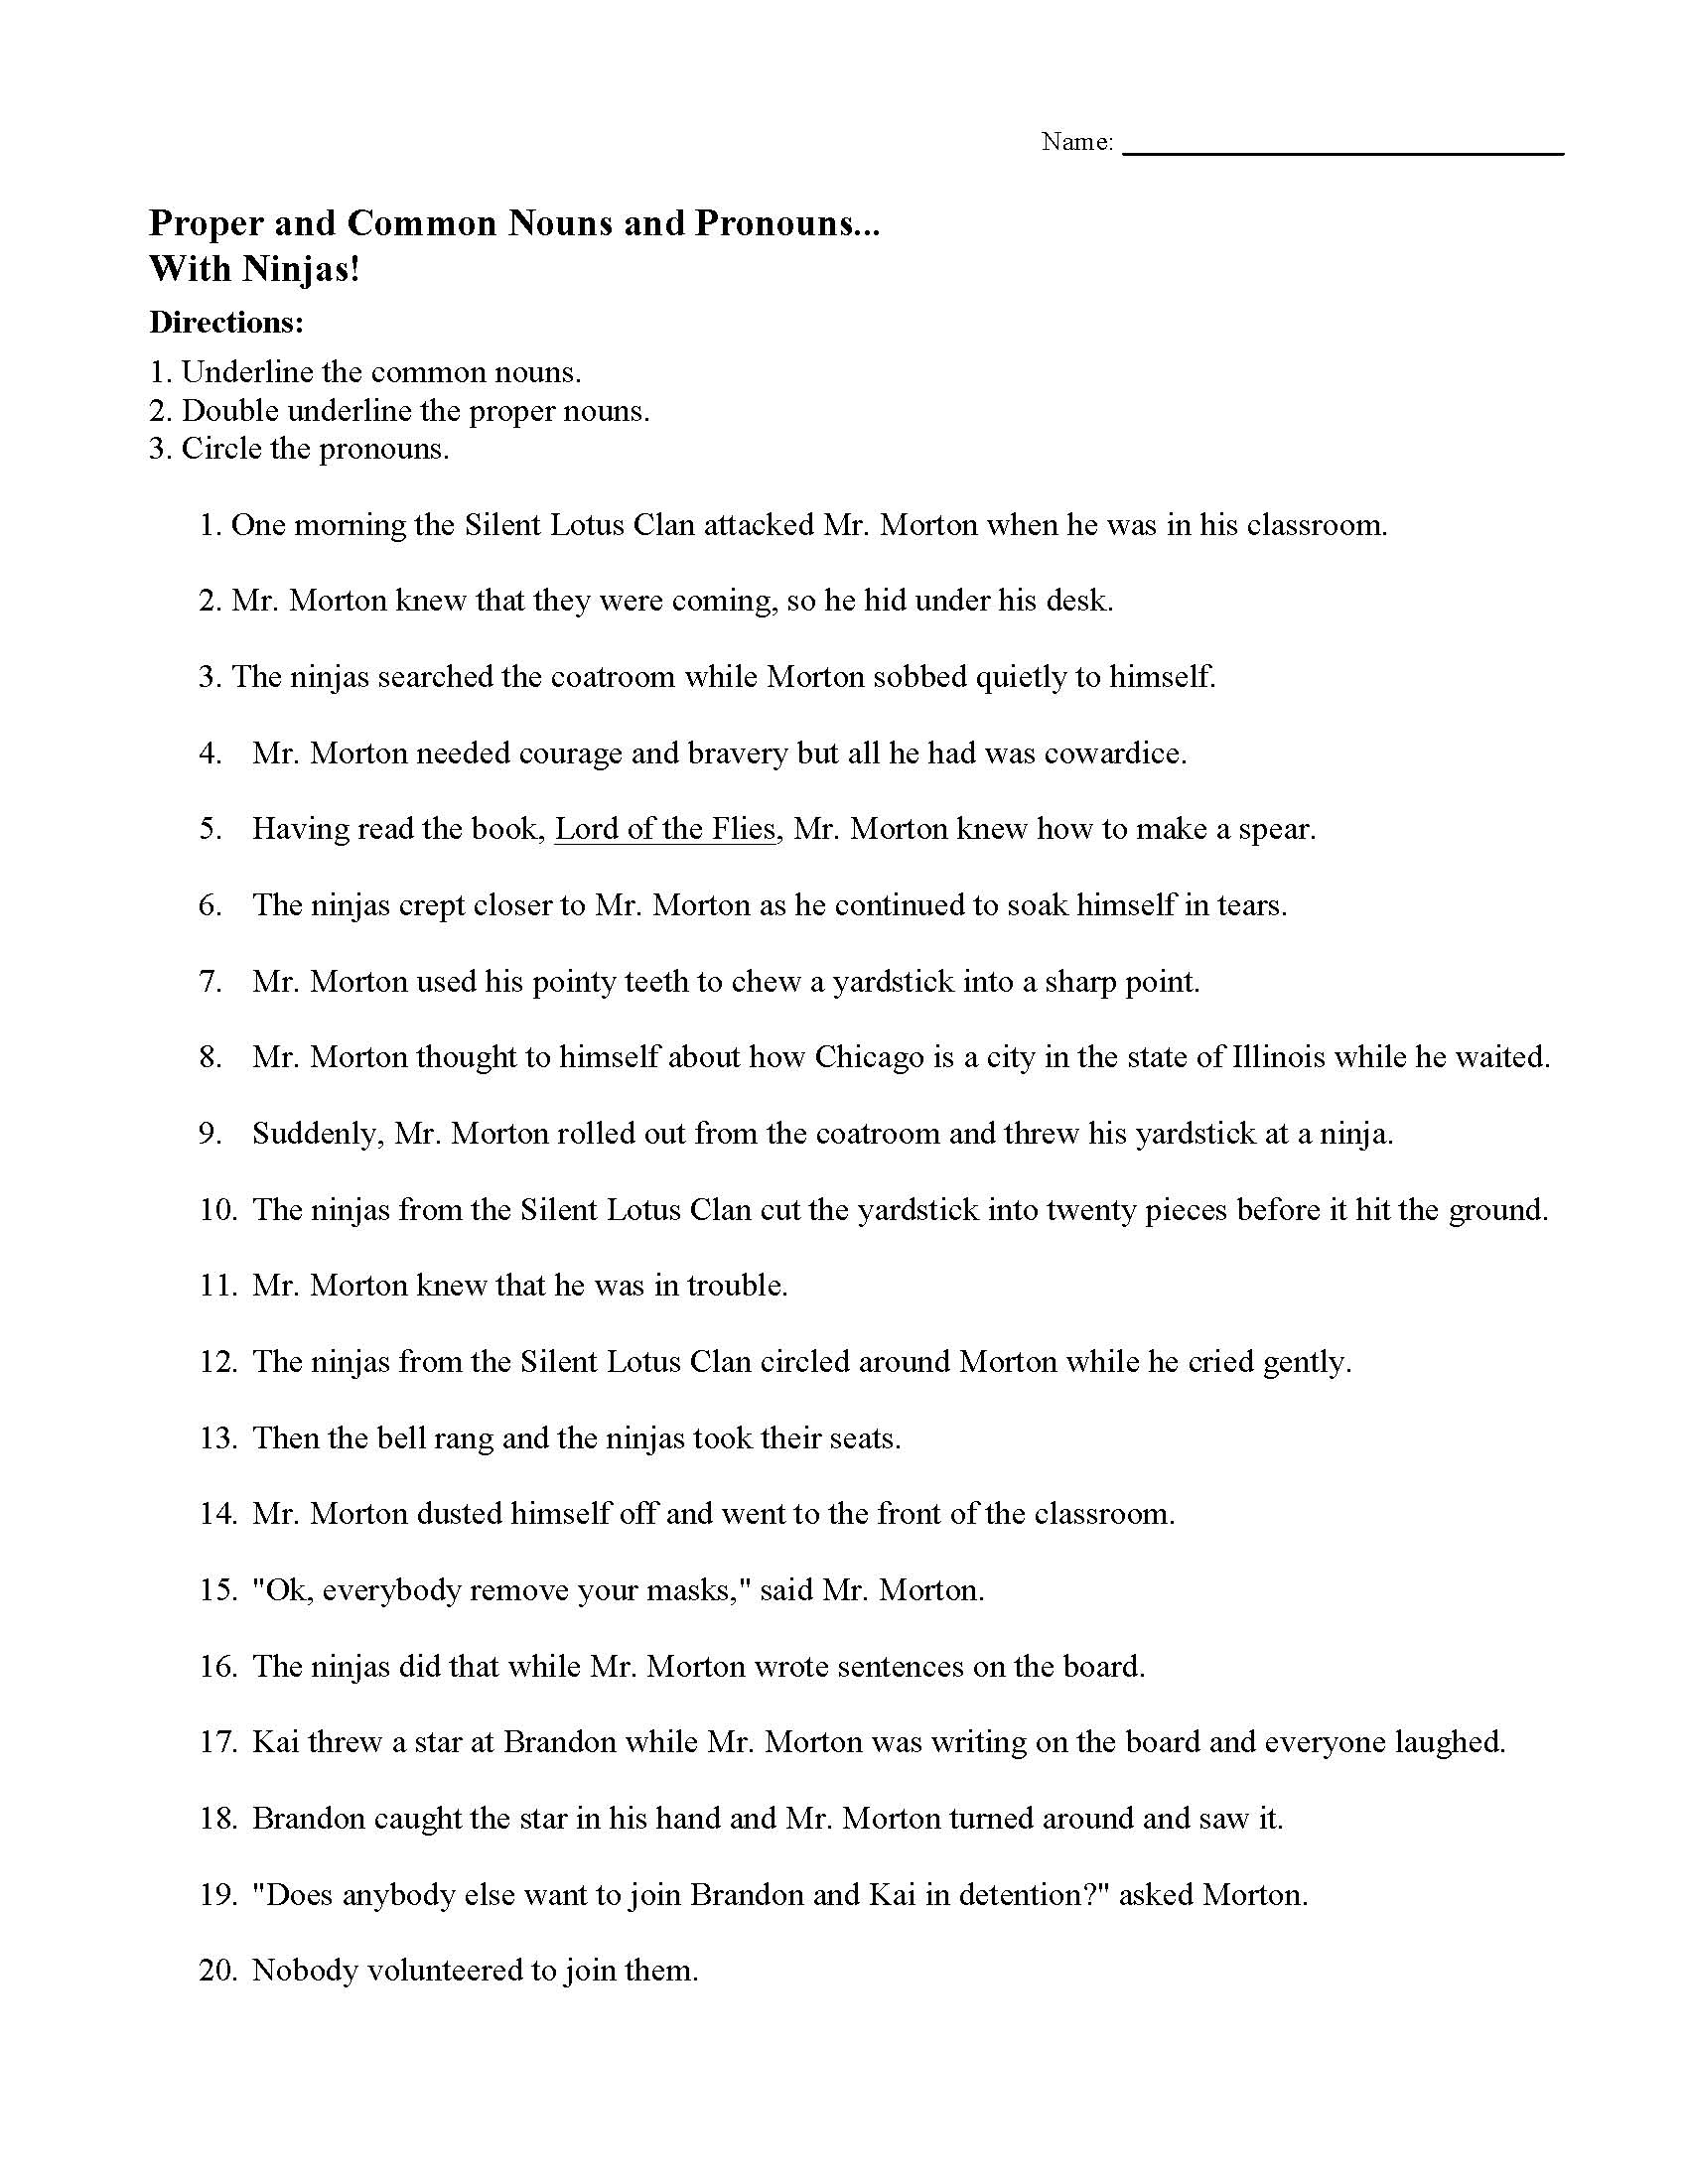 Proper And Common Nouns And Pronouns With Ninjas Worksheet Answers